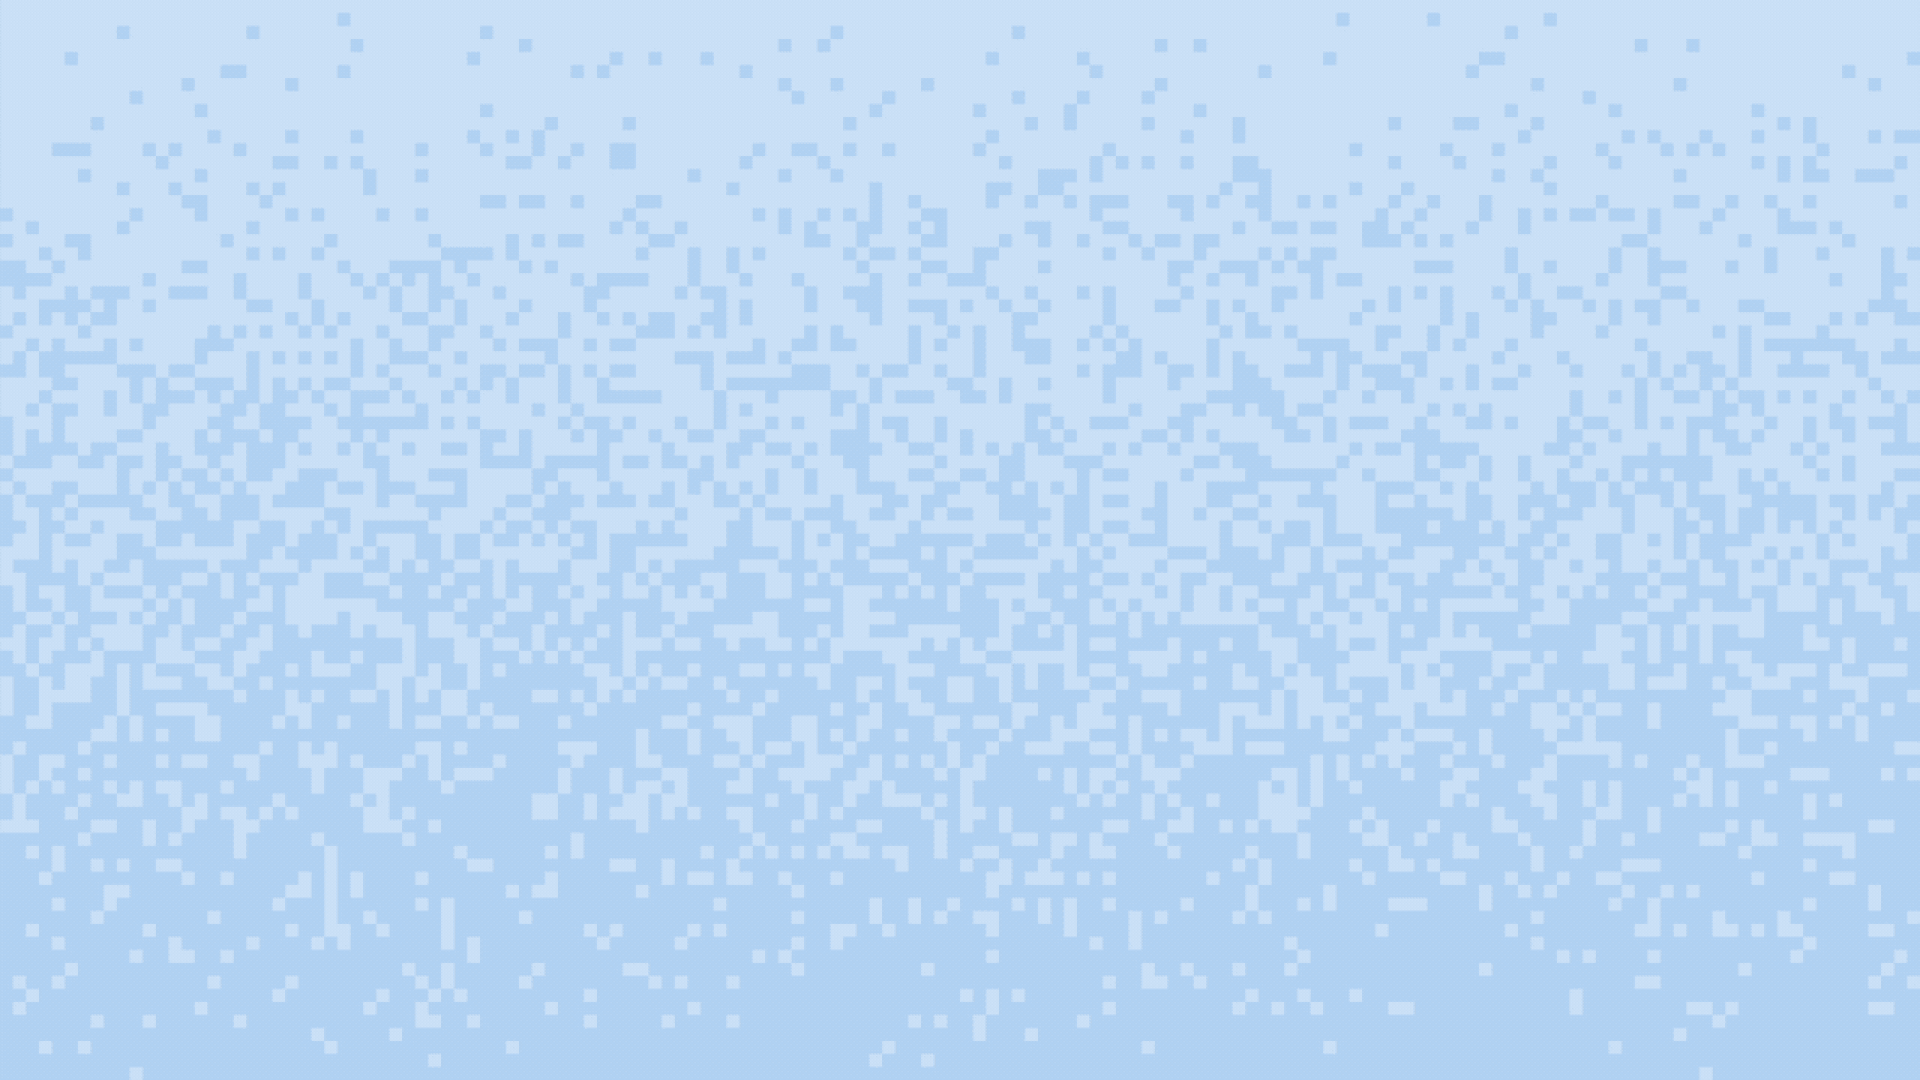 Illustration of a pixelated bird and bee flying across the image.